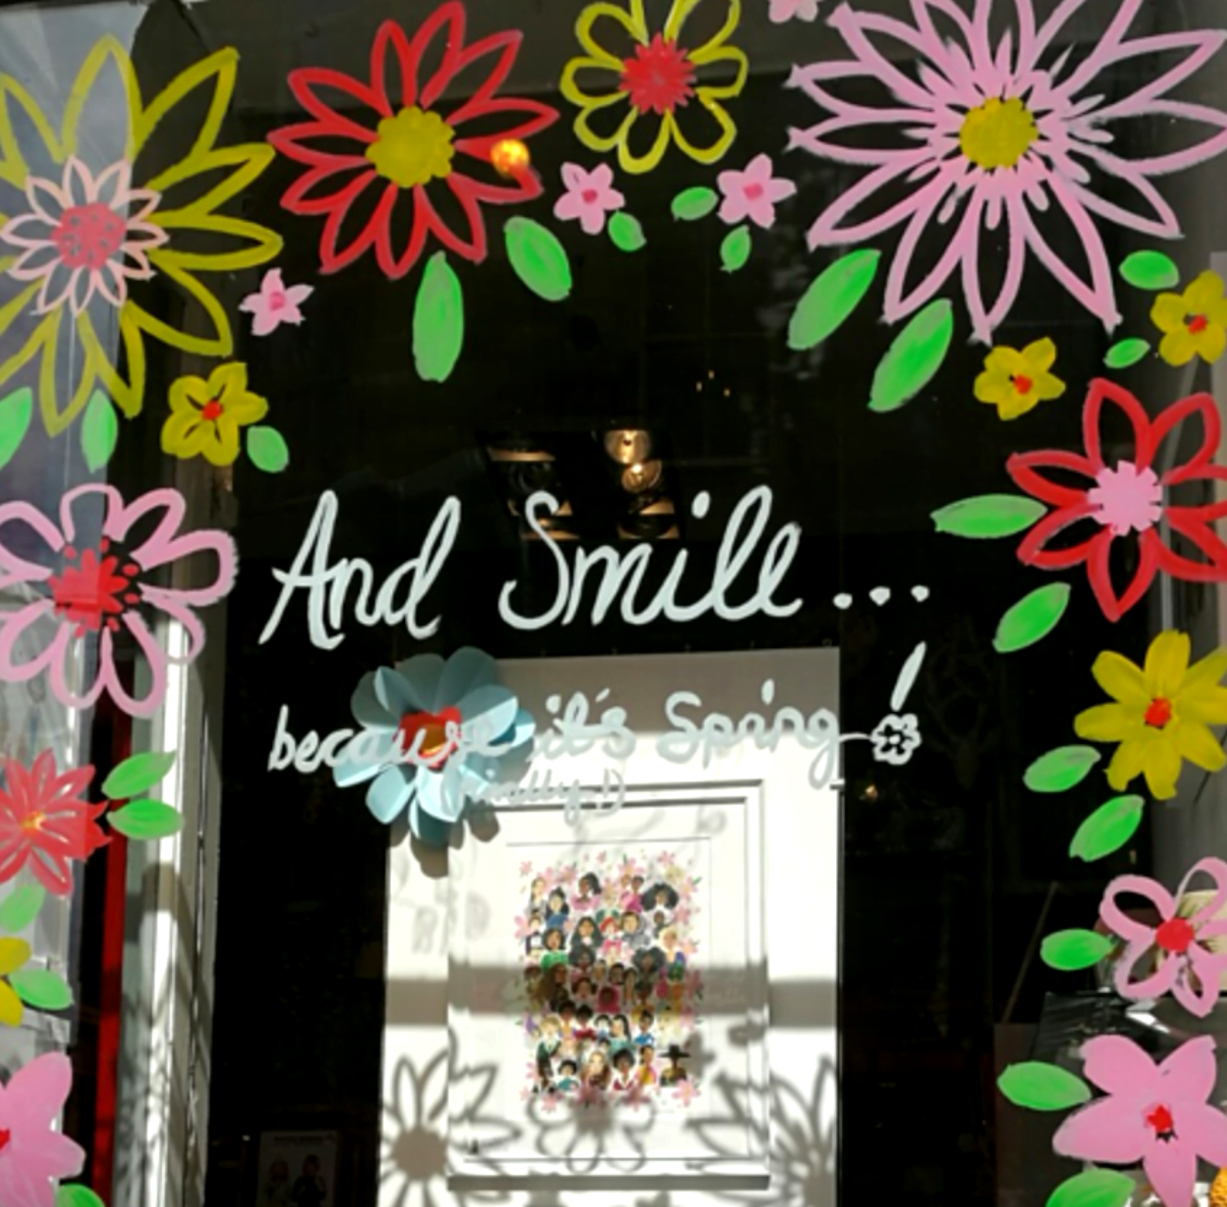 And Smile – It’s Sunny! | The Red Door Gallery